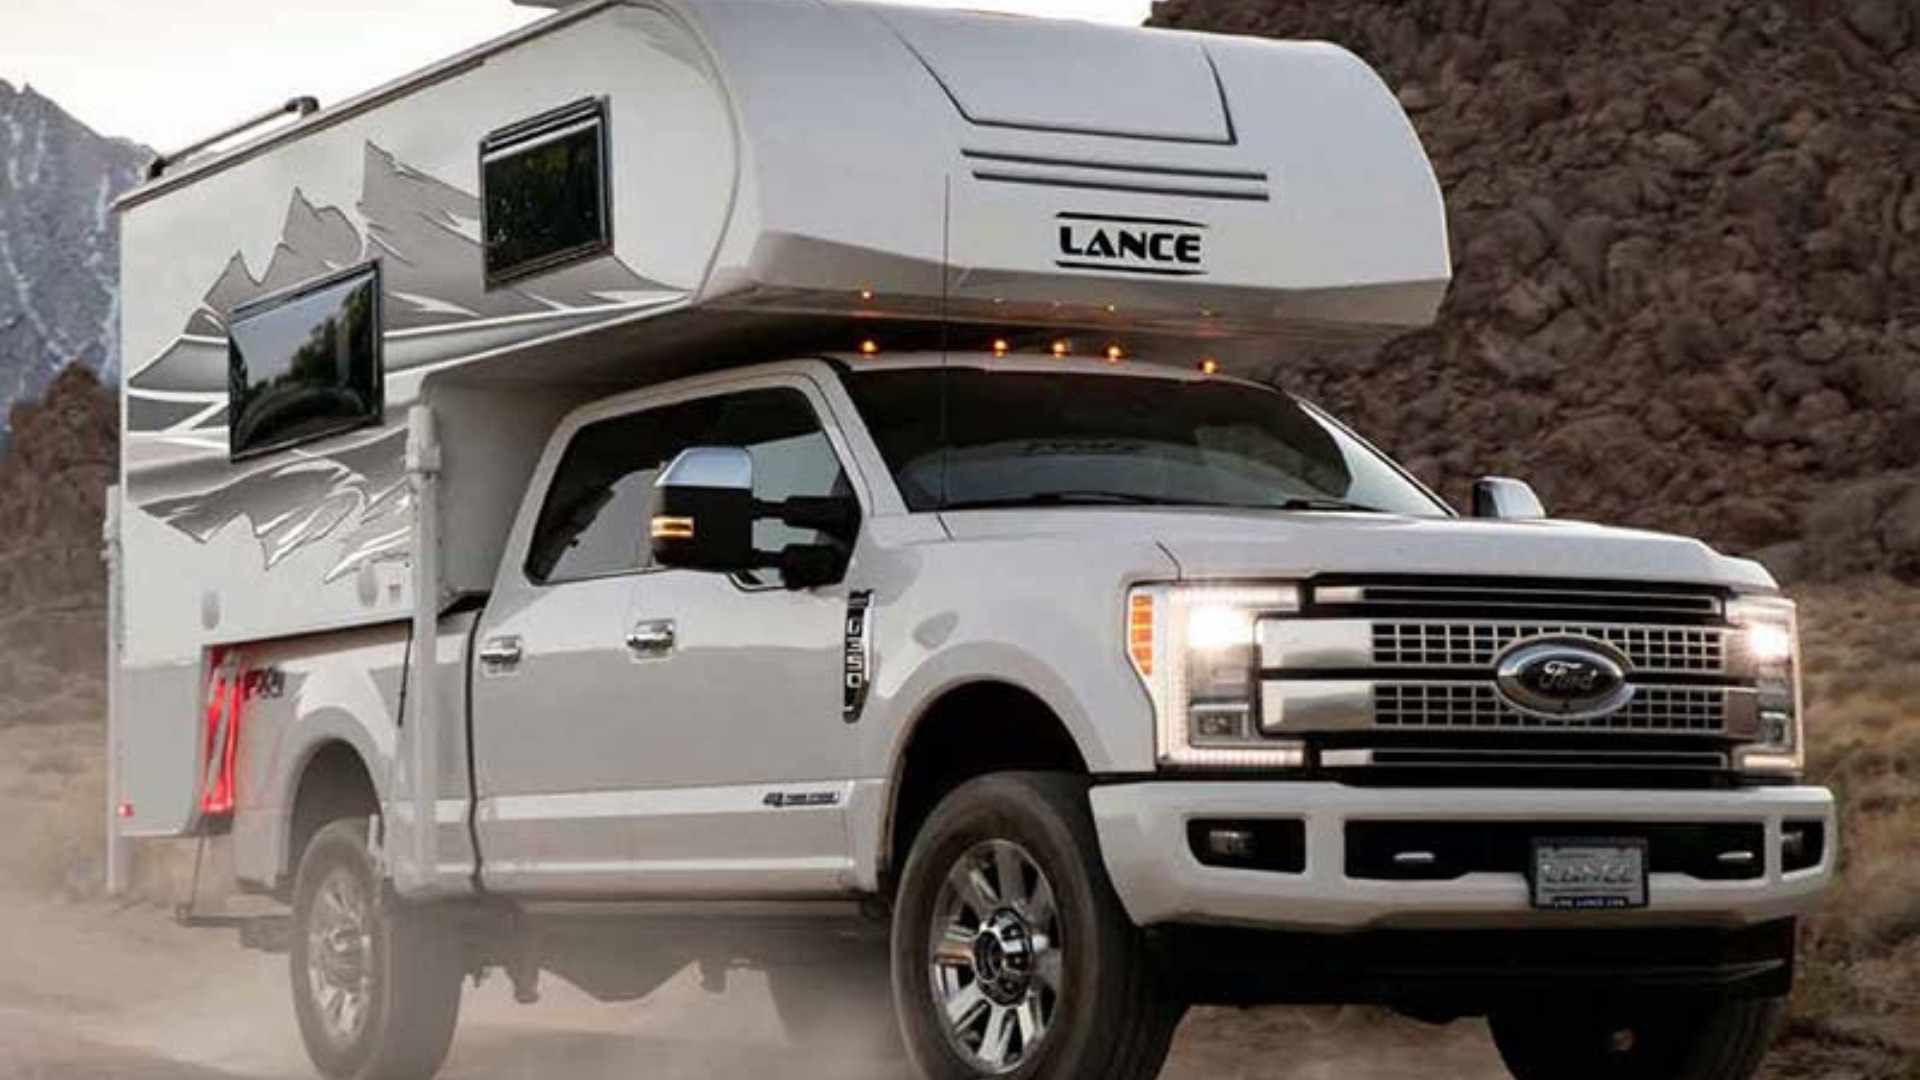 Lance 650 Truck Camper: A Complete Review